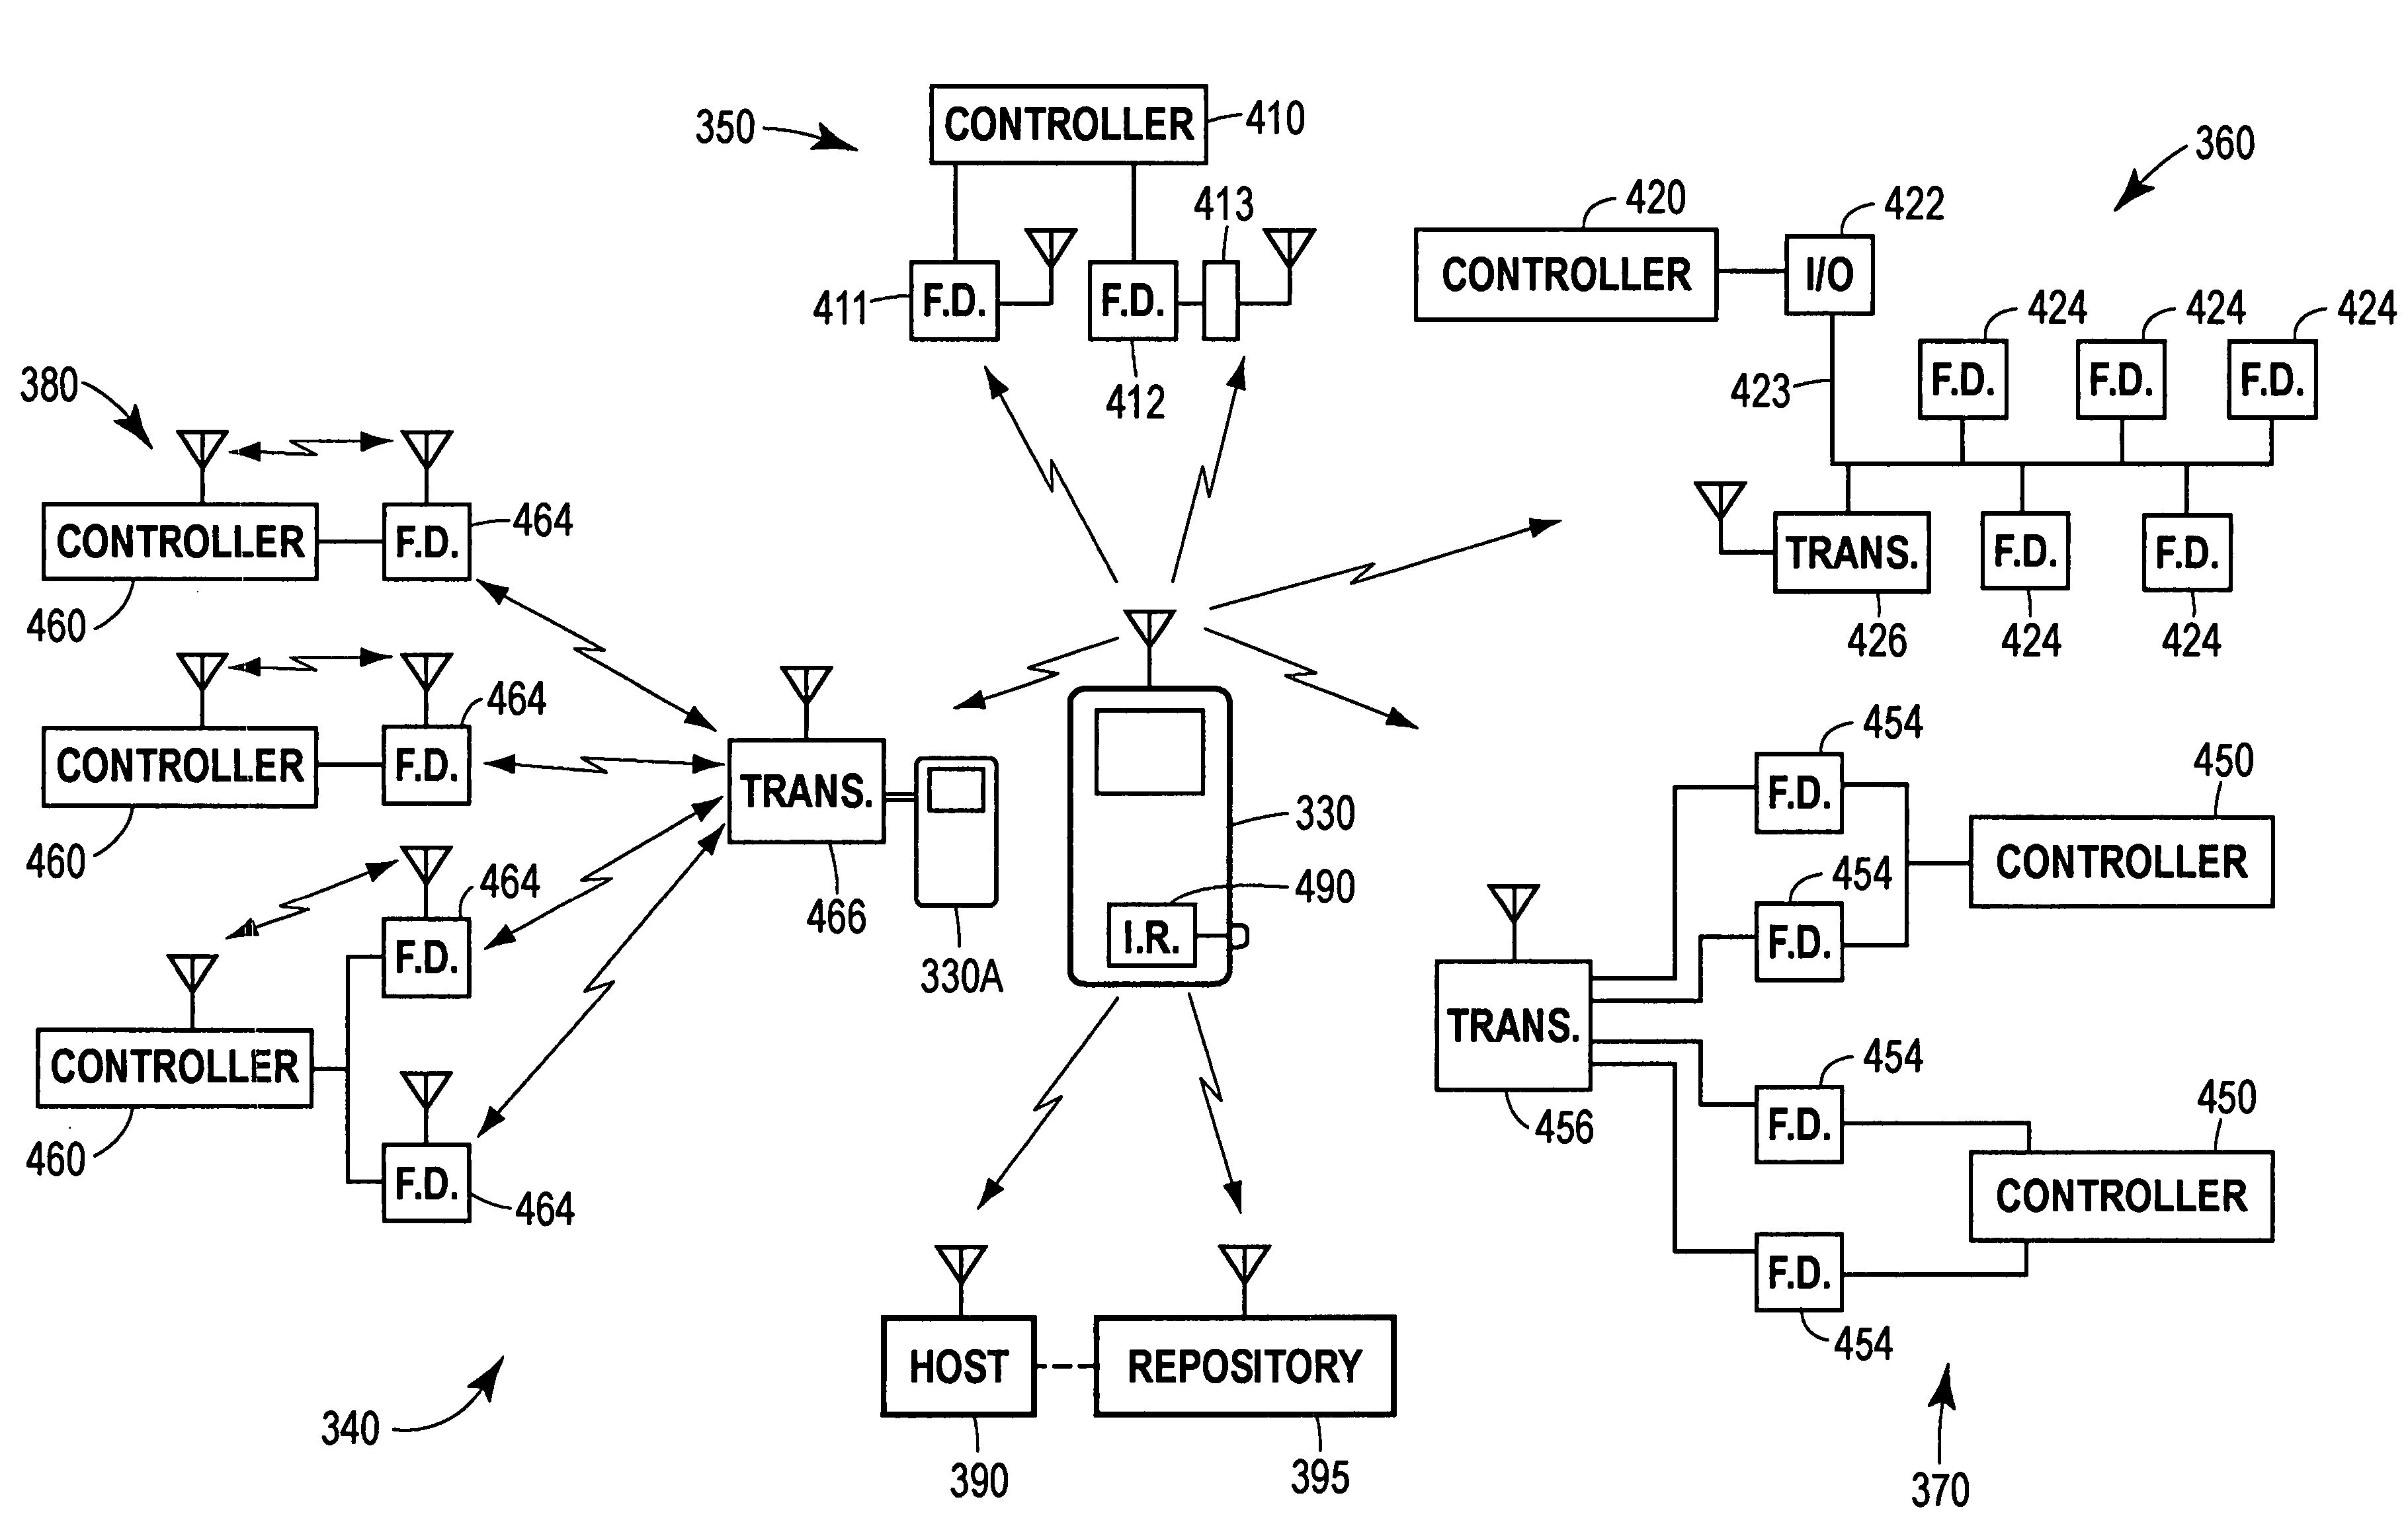 Wireless handheld communicator in a process control environment